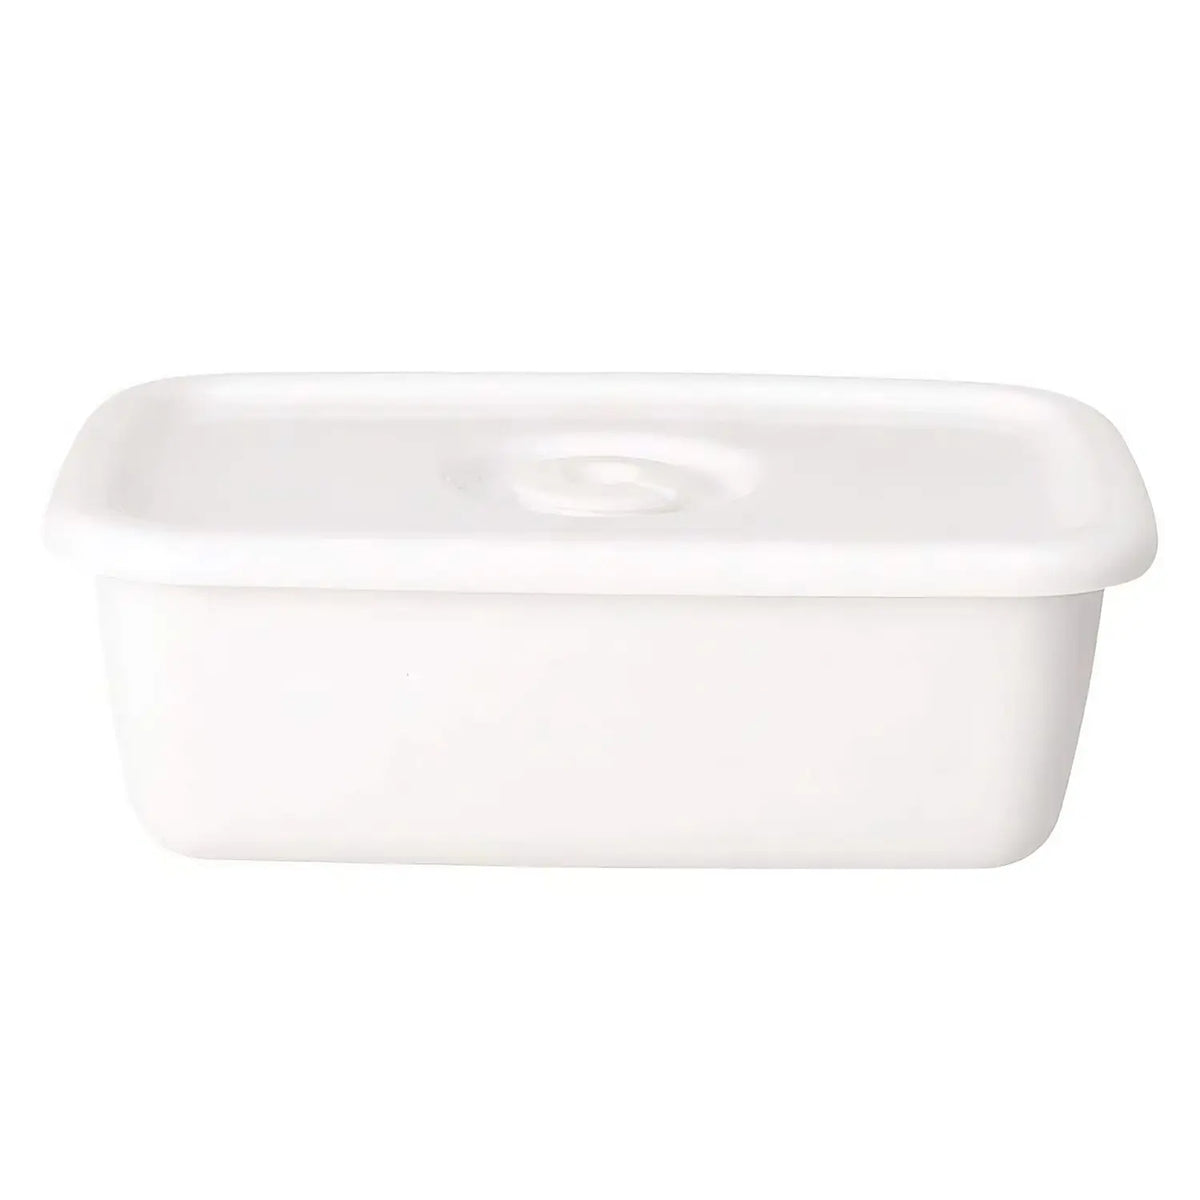 Noda Horo White Series Enamel Rectangle Deep Food Containers with Sealed Lid